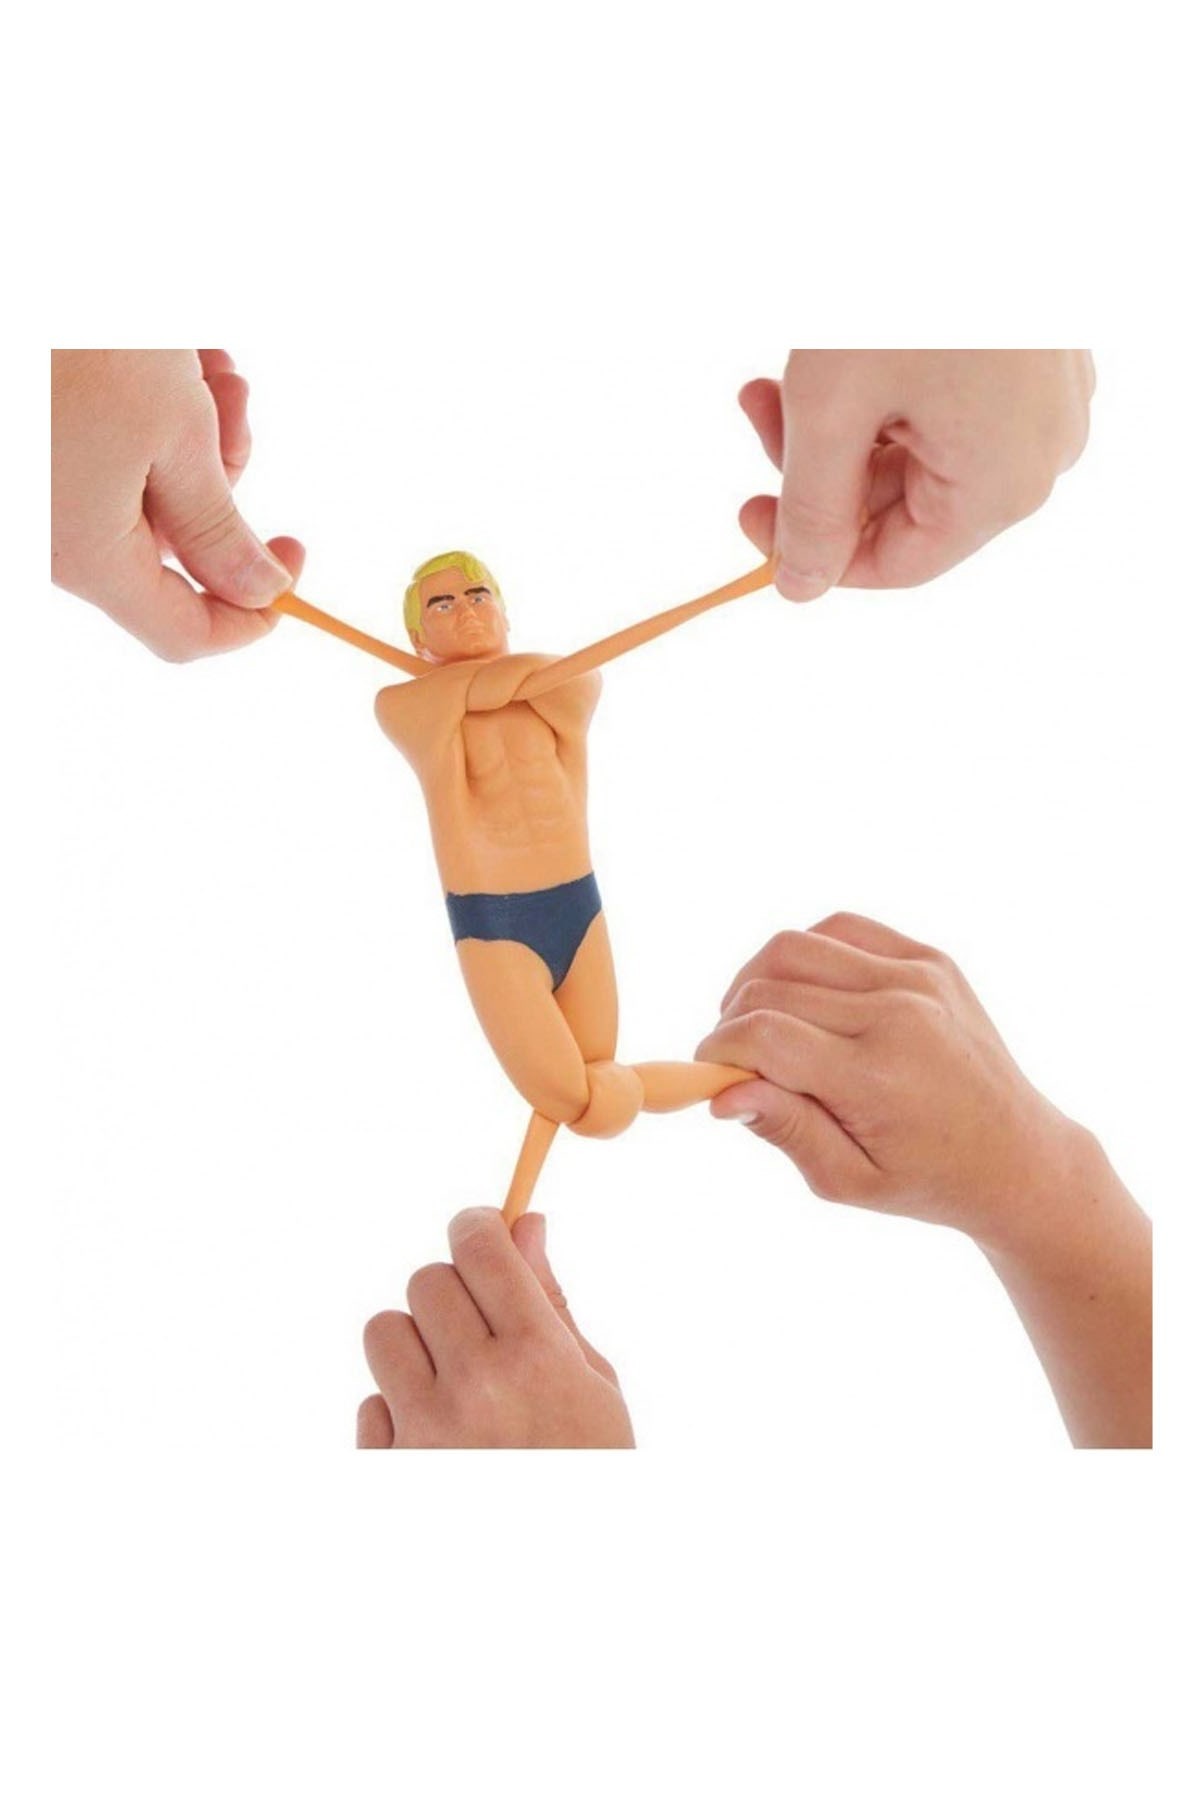 Stretch Armstrong Mini Stretch Armstrong 07484